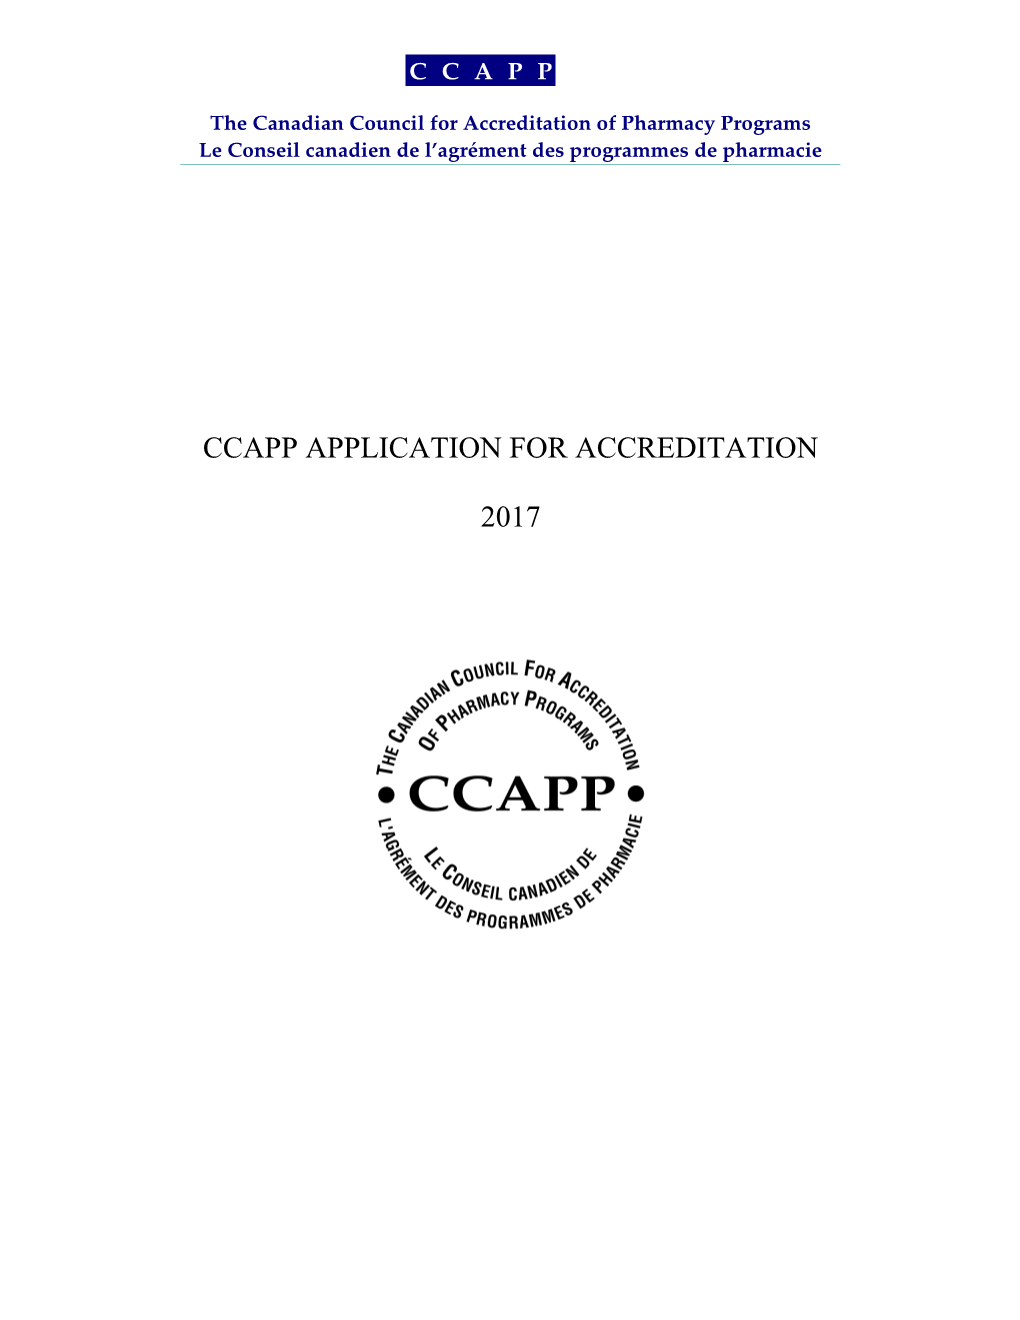 The Canadian Council for Accreditation of Pharmacy Programs s1